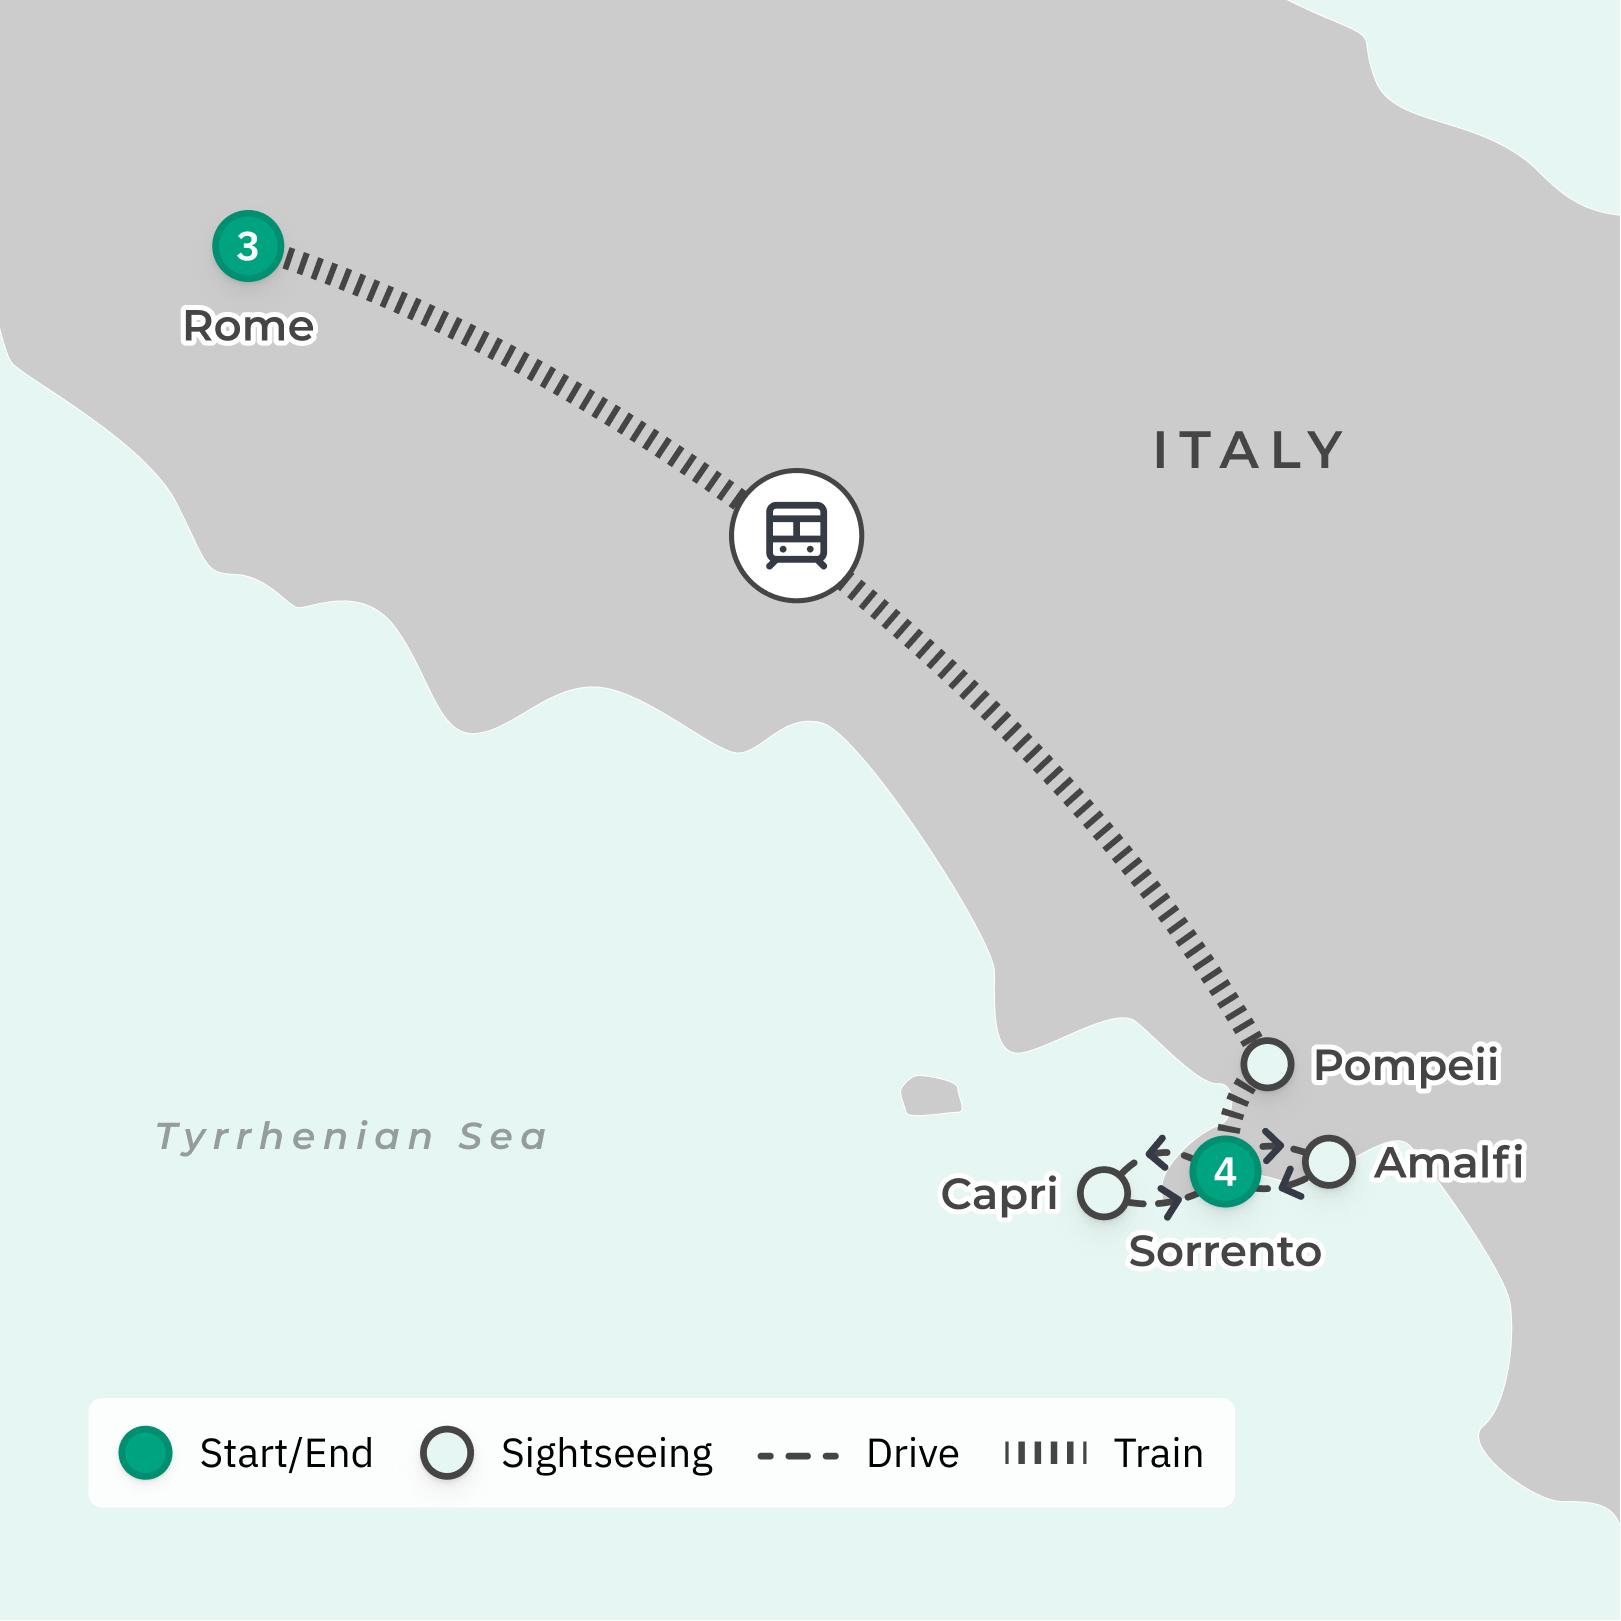 Southwest Italy Tour with Pompeii, Amalfi Coast Excursion & Skip-the-Line Vatican Museums Access route map